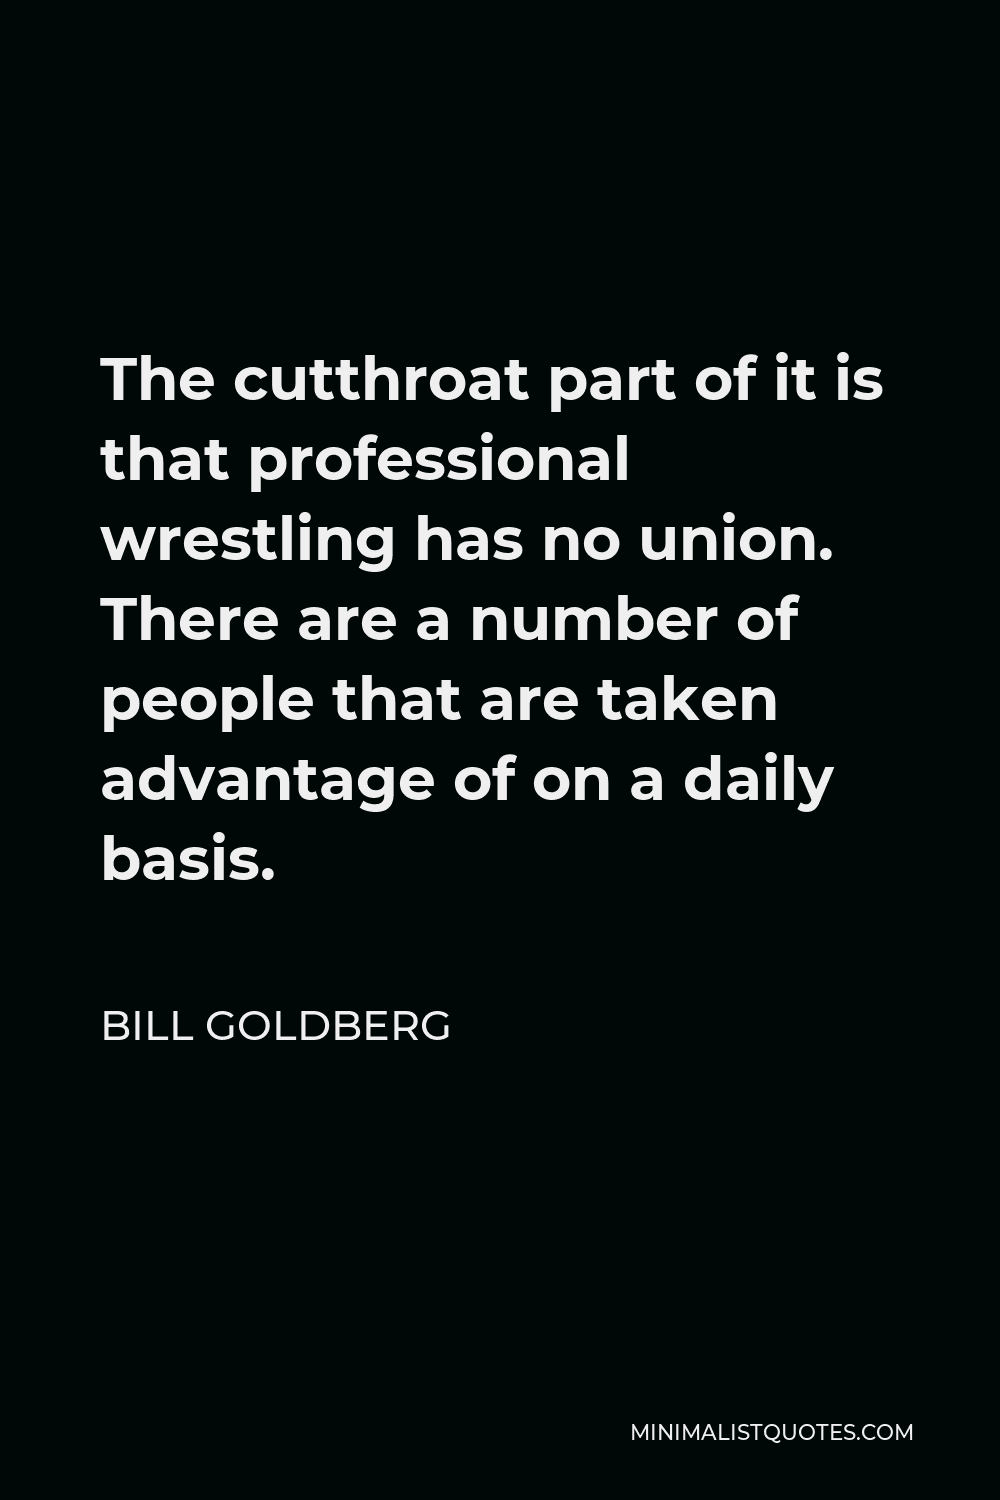 Bill Goldberg Quote - The cutthroat part of it is that professional wrestling has no union. There are a number of people that are taken advantage of on a daily basis.